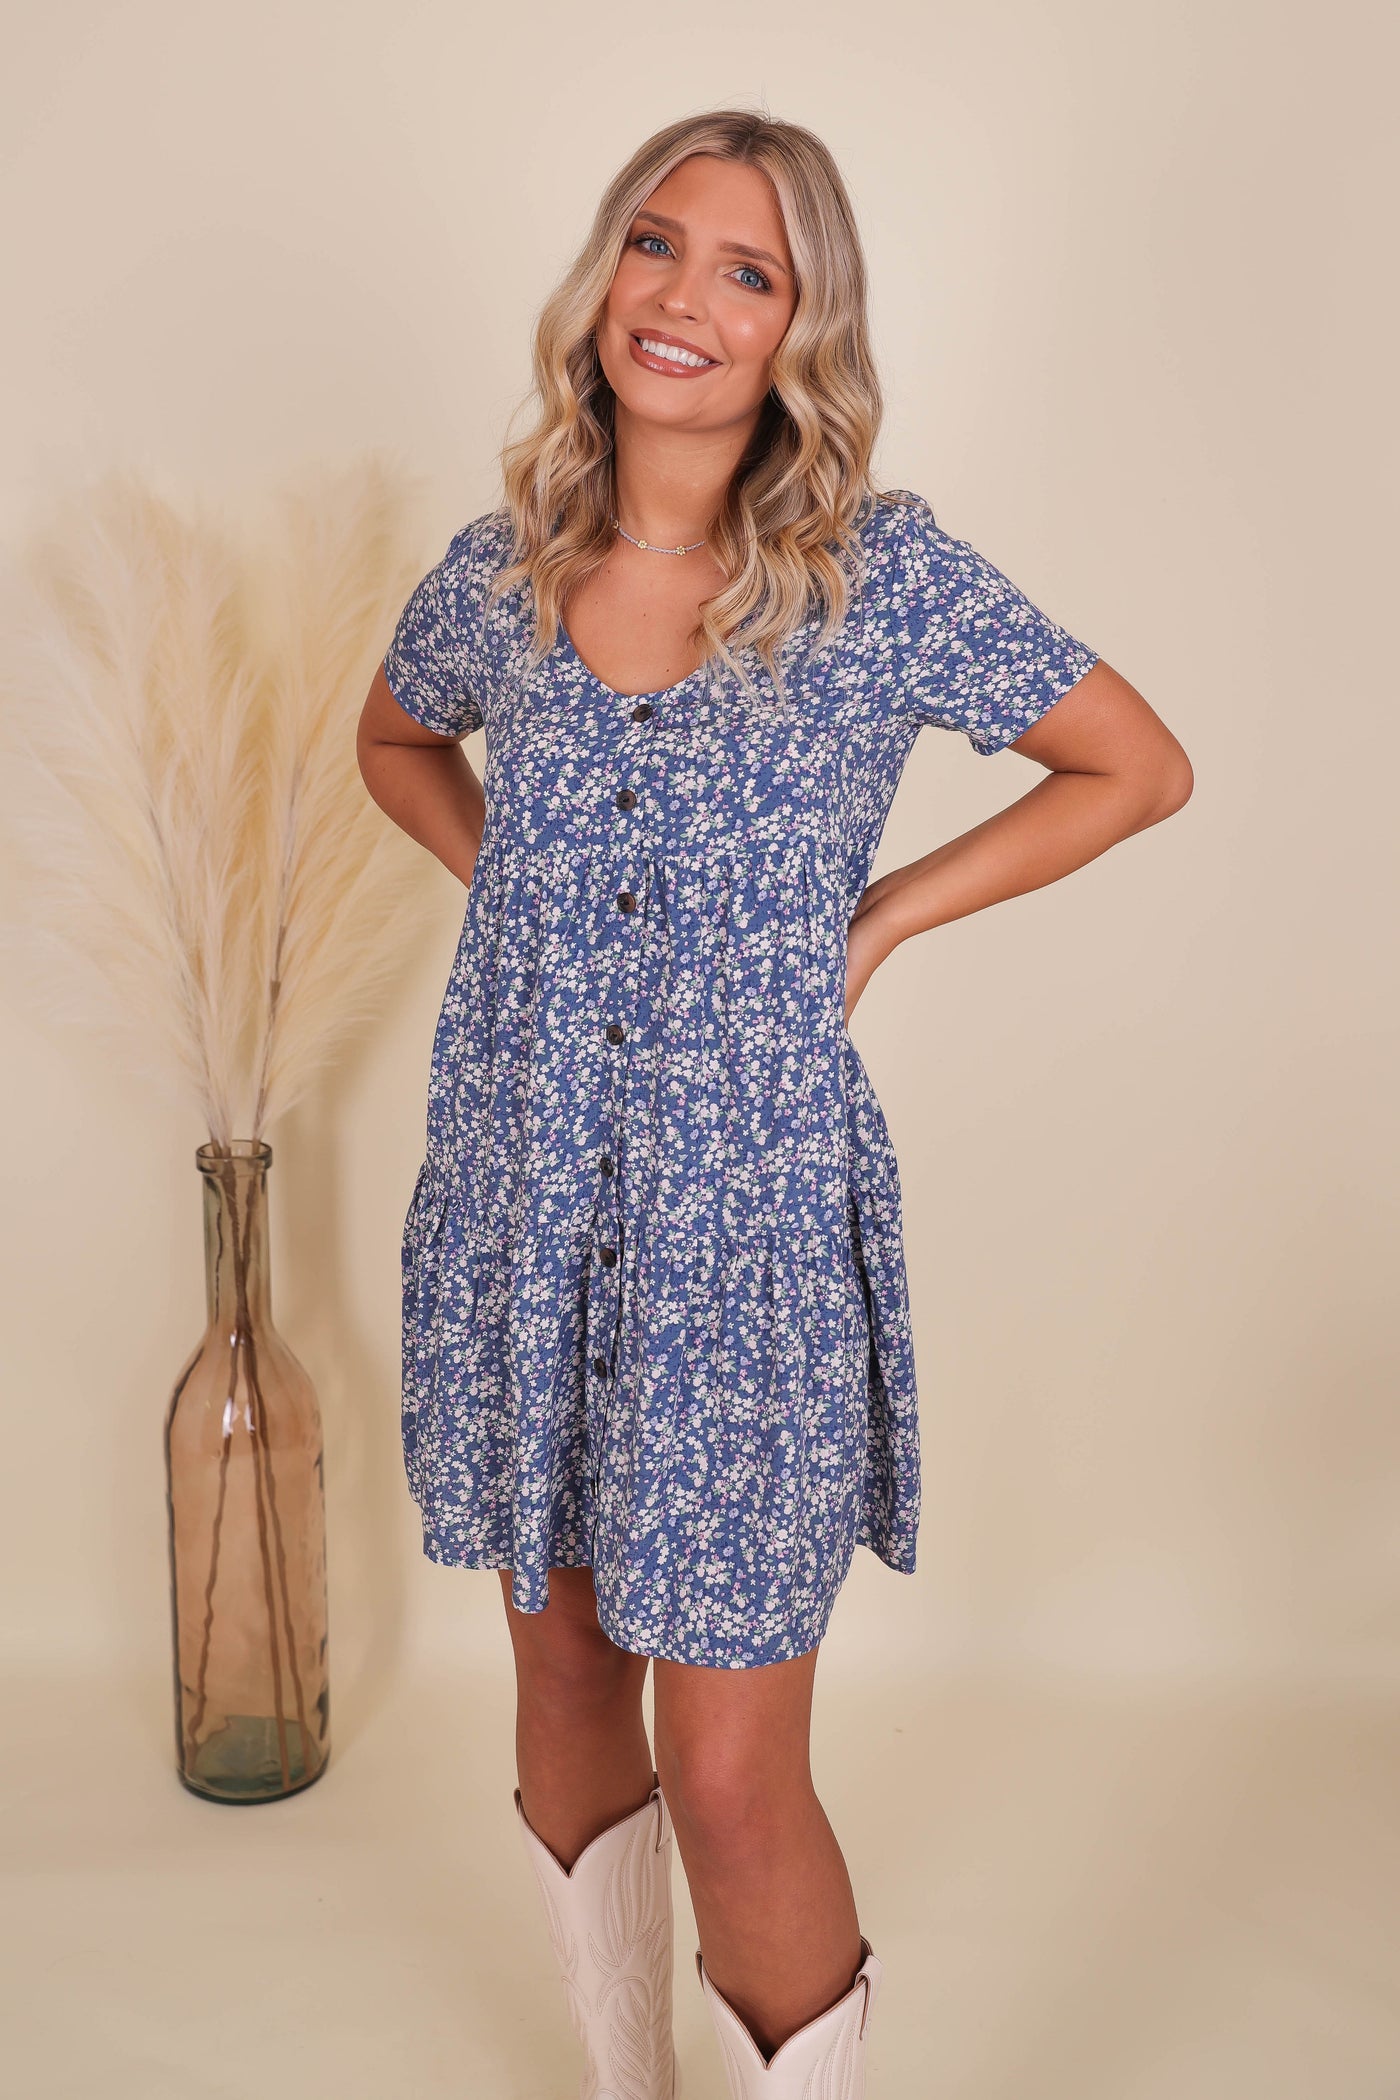 Dainty Floral Print Dress- Tiered Babydoll Doll Dress- Tiered Dress With Buttons